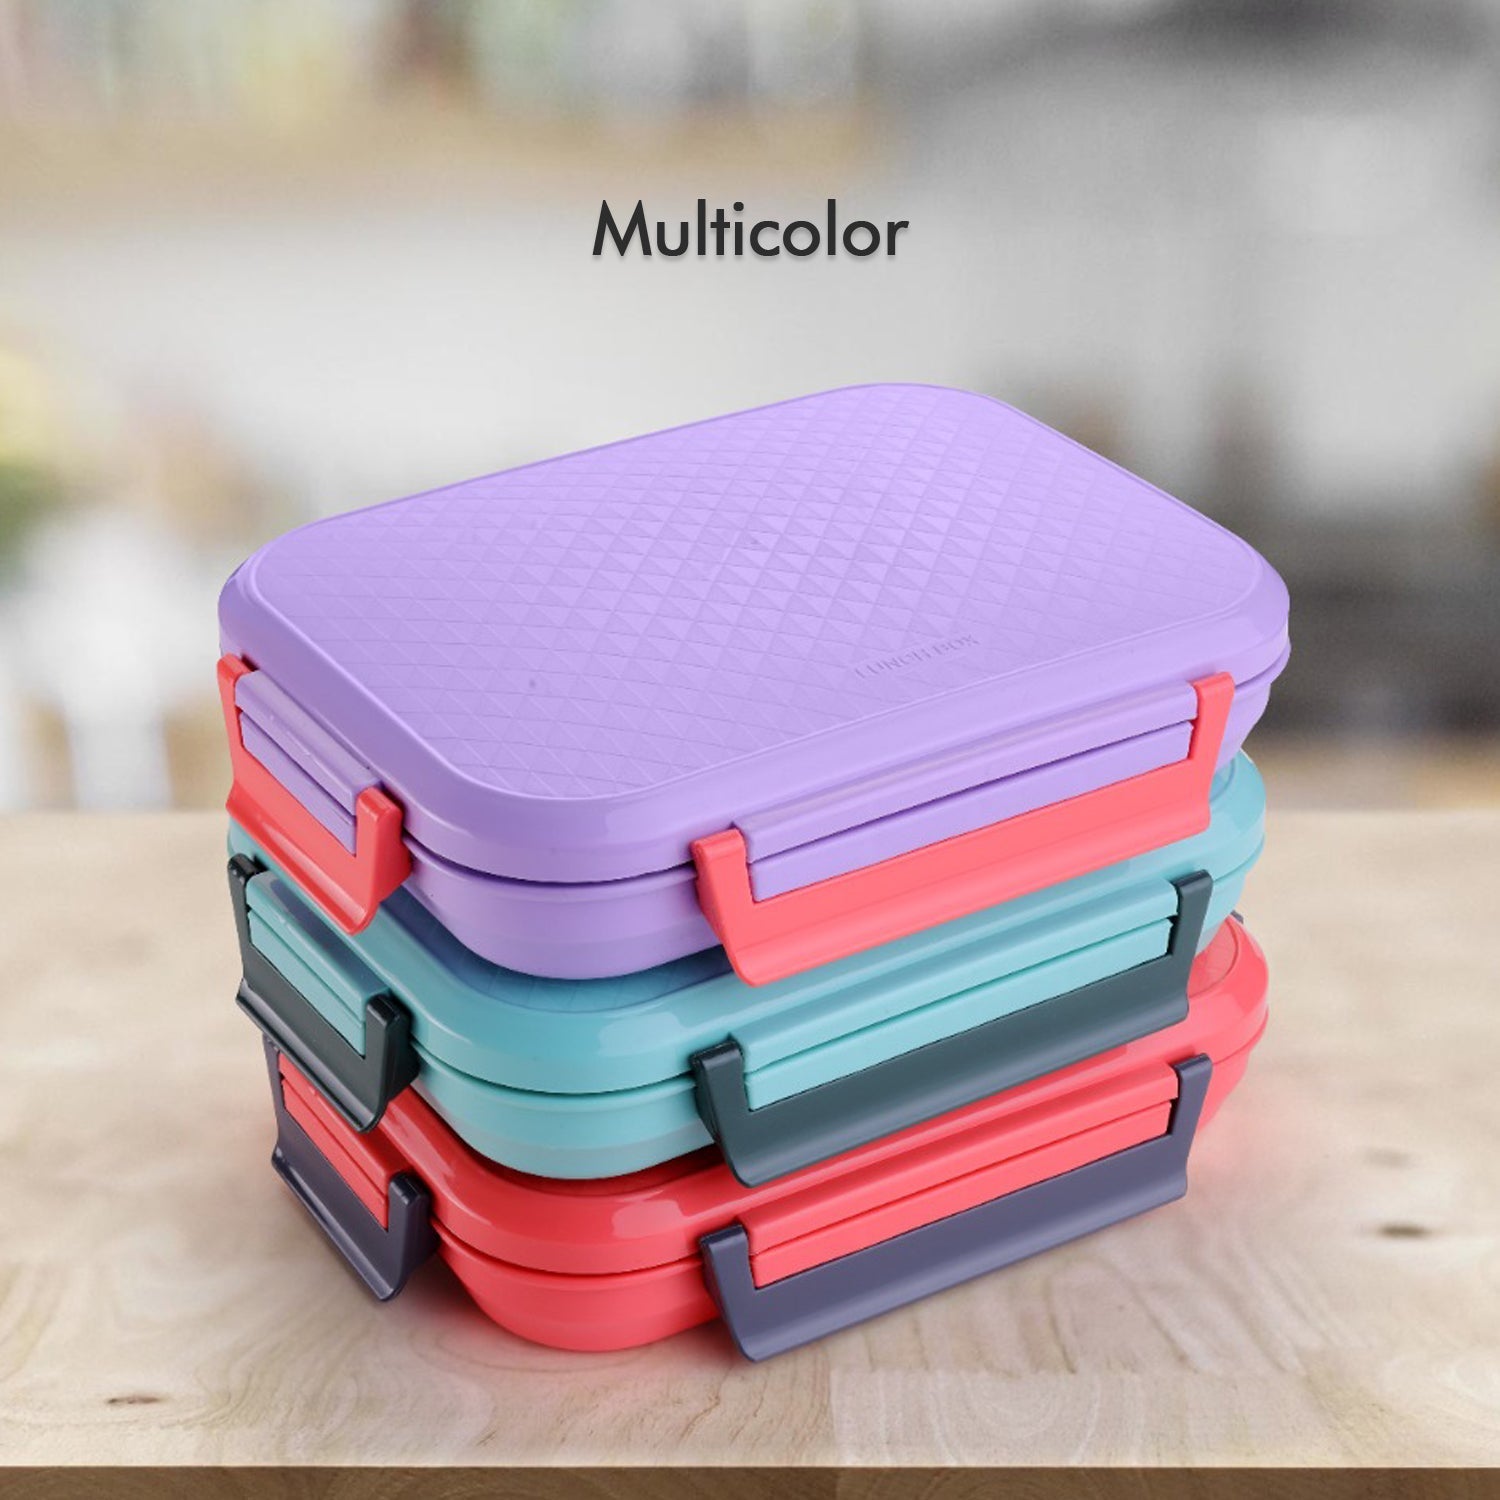 5367 Lunch Box Food Containers for School Vivid Insulated Lunch Bag Keep Fresh Delicate Leak-Proof Anti-Scalding BPA-Free Perfect for a Filling Lunch Outdoor DeoDap